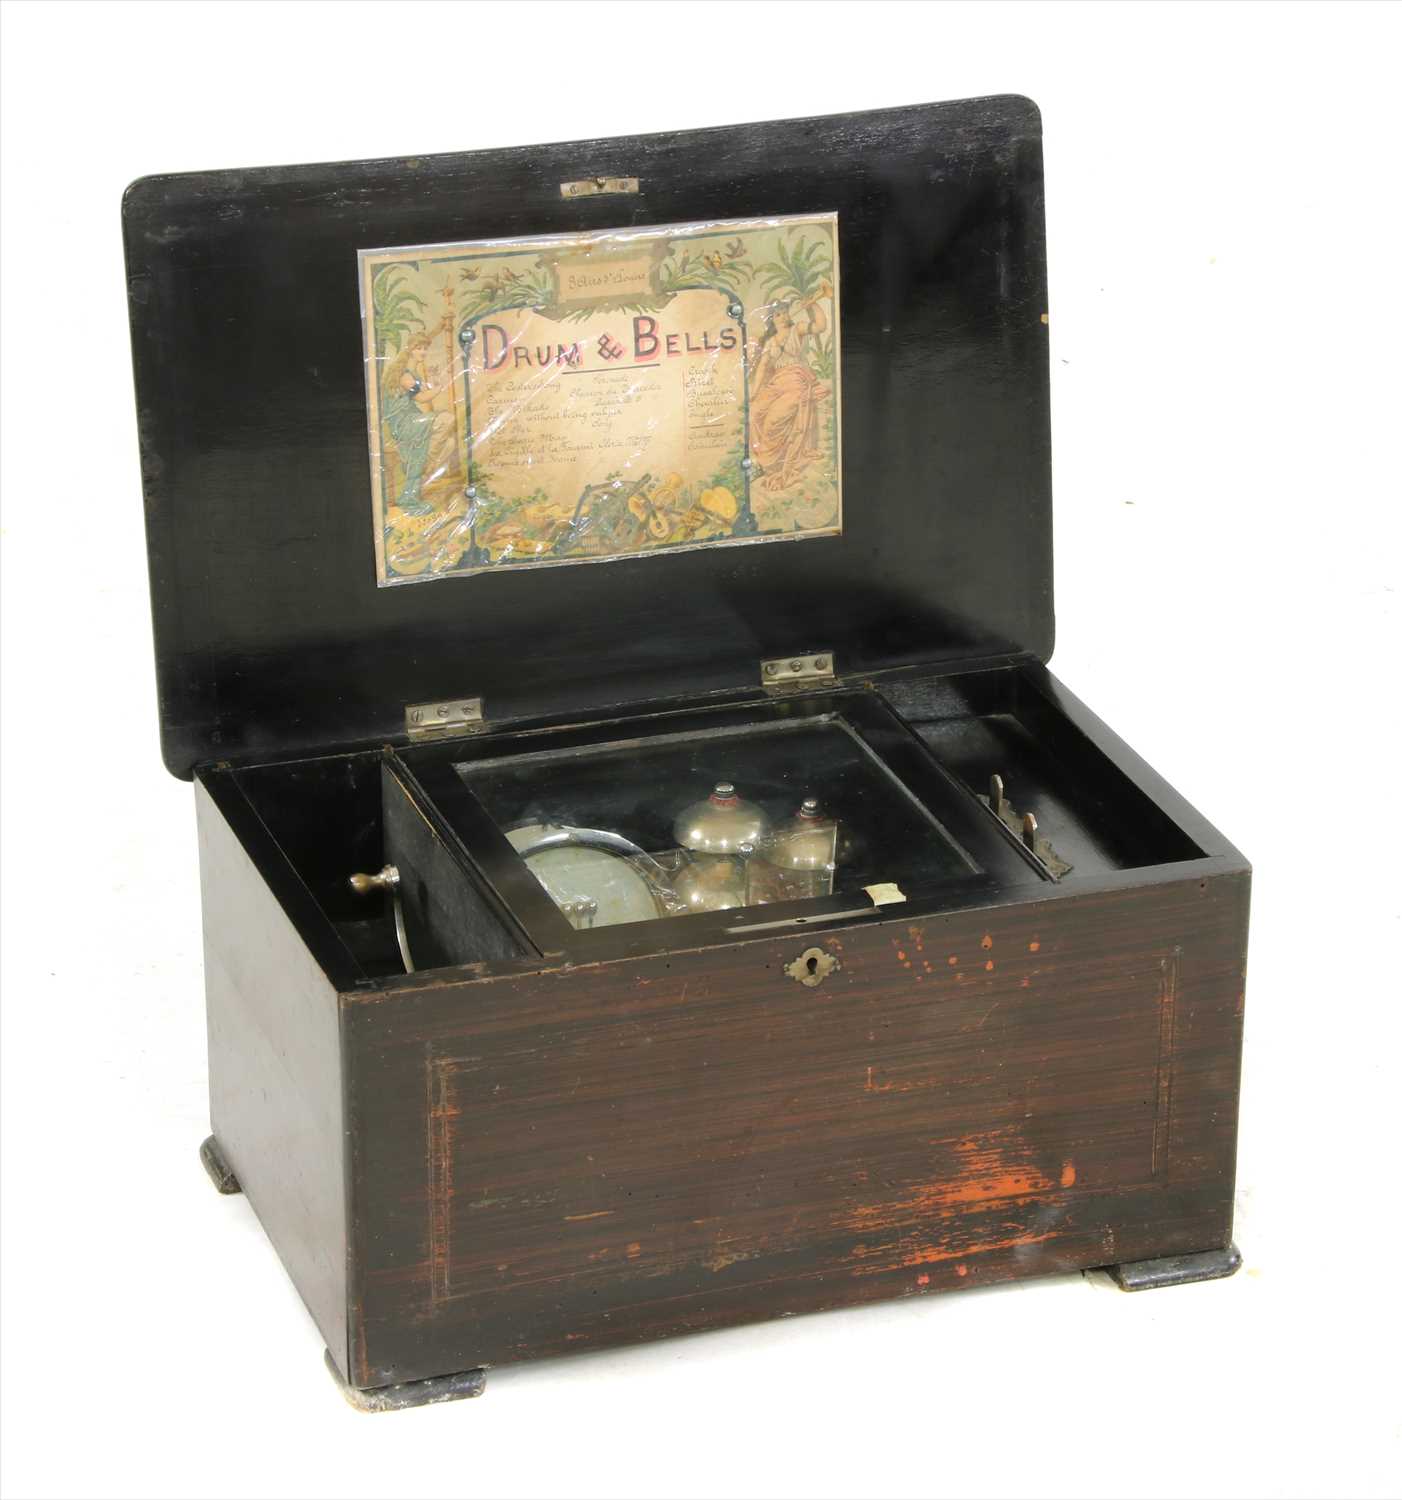 Lot 483 - A late 19th century drum and bells music box